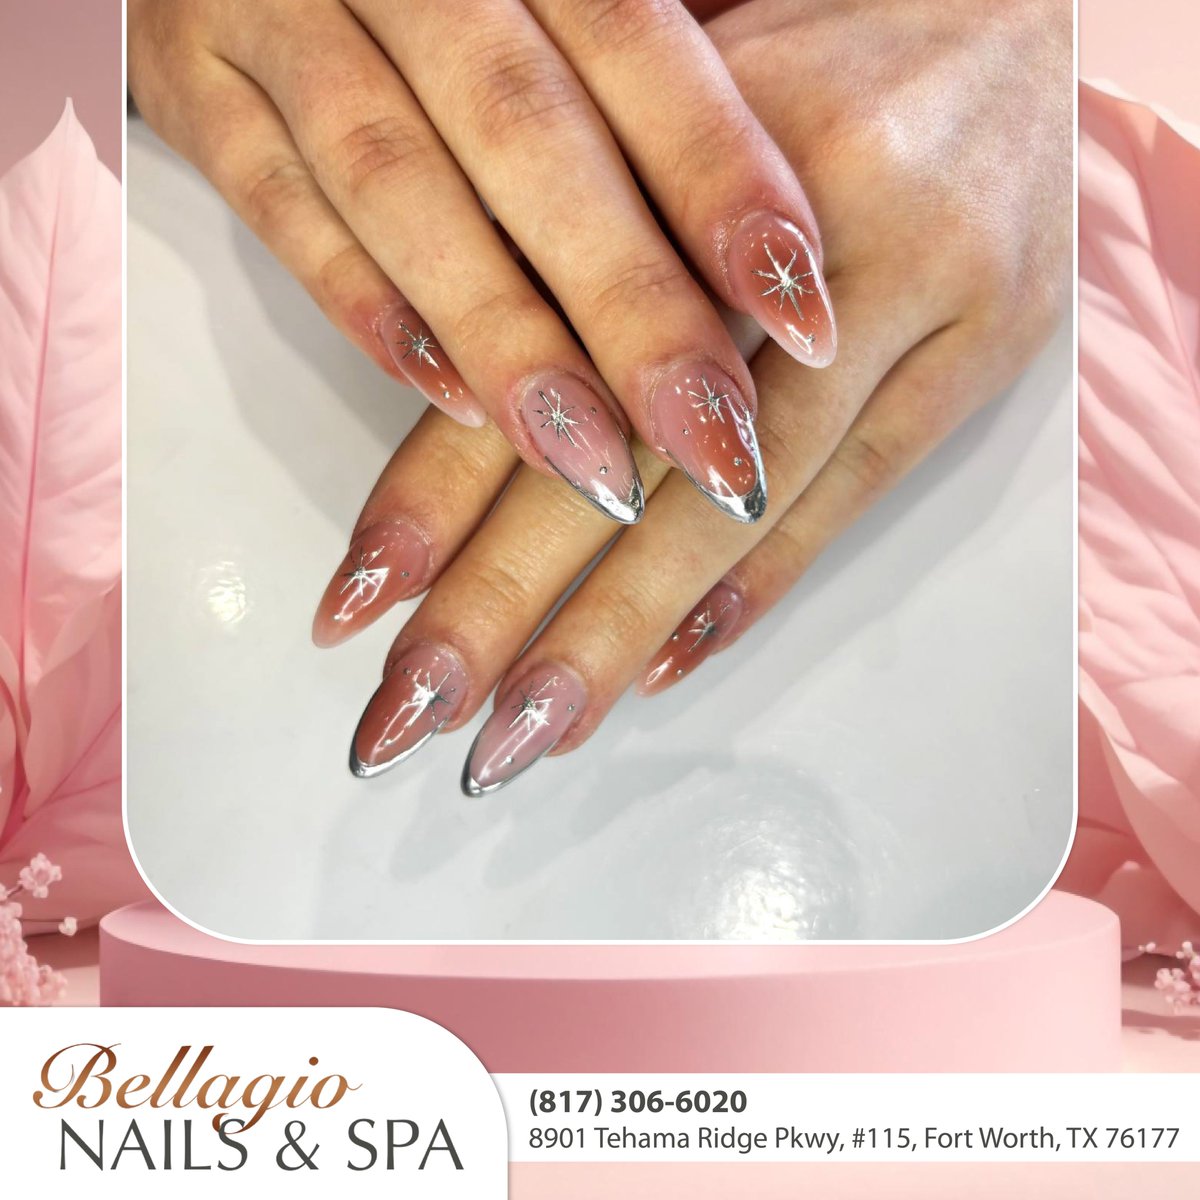 ✨ 𝓣𝓱𝓮 𝓶𝓪𝓰𝓲𝓬 𝓽𝓸𝓾𝓬𝓱 𝓲𝓼 𝓻𝓮𝓪𝓵! ✨
Our expert nail technicians will transform your nails into dazzling works of art.
#bellagionailspa #bellagiotx #bellagionails #bellagiofortworth #nailsalonfortworth #nailsalontx #nail #nailsoftheday #longnails #naildesign